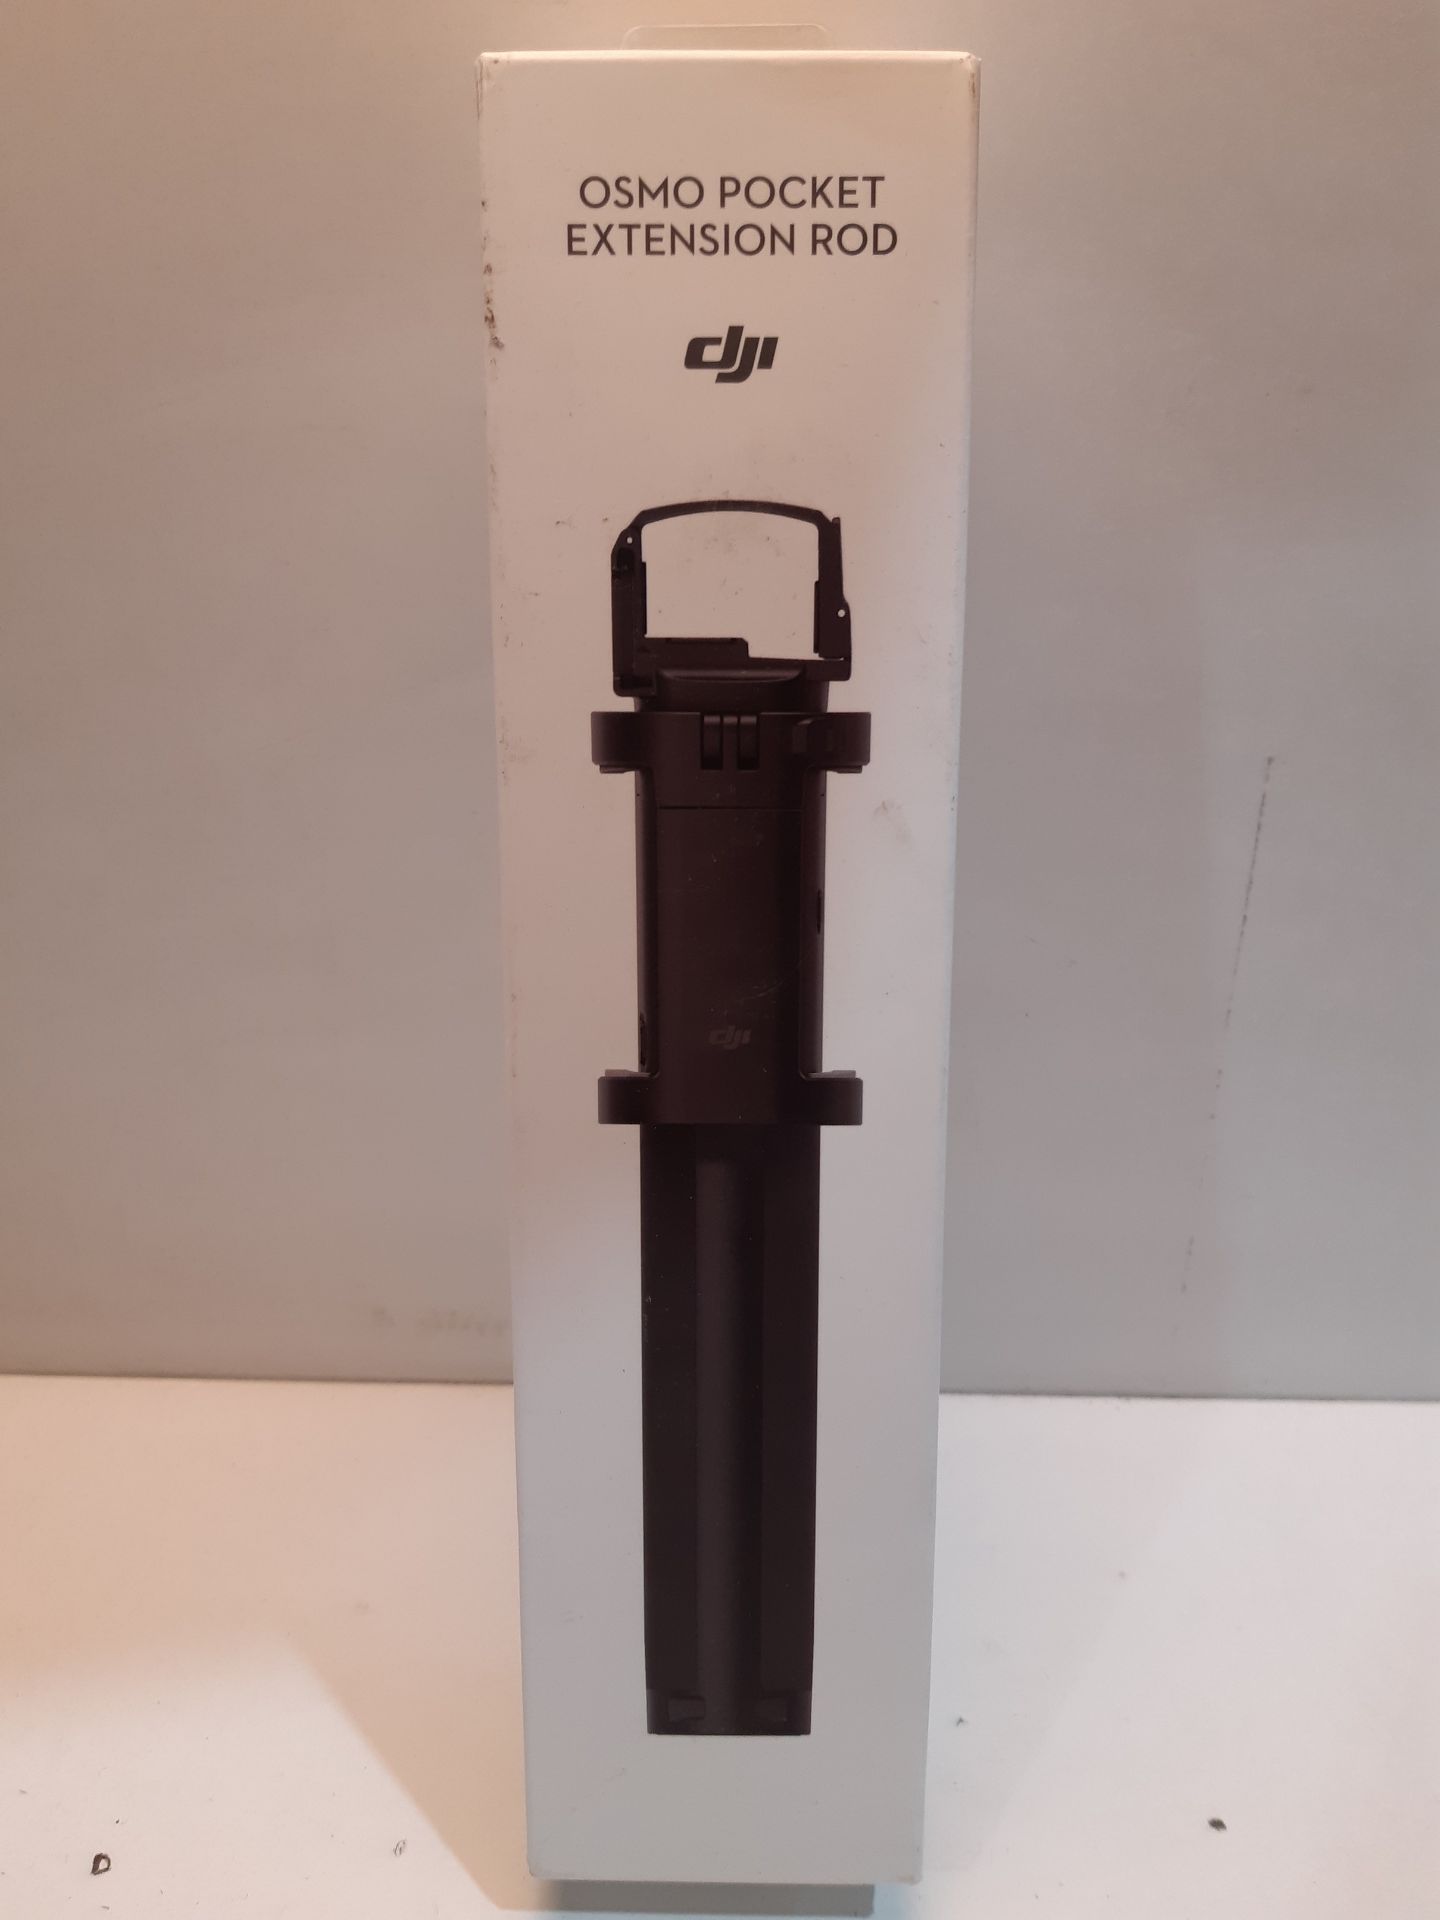 RRP £68.00 DJI Osmo Pocket - Extension Rod - Image 2 of 2